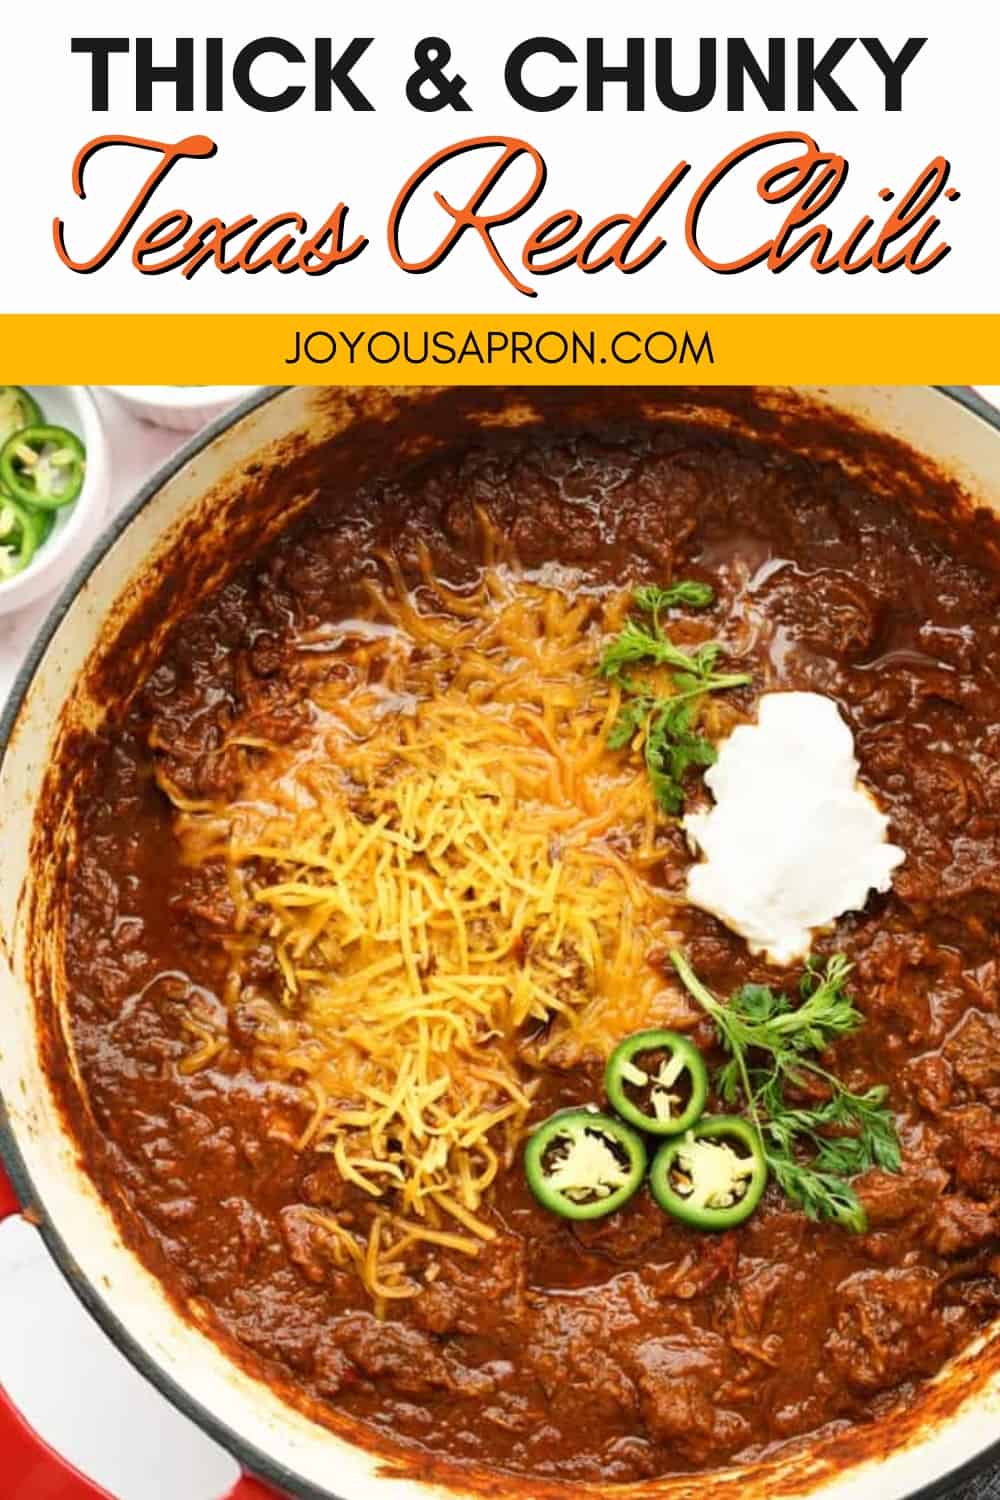 Texas Chili - also called Texas Red Chili, this is an authentic and classic Texas Chili recipe. Tender chunks of beef is cooked with chilies and tomatoes to make a hearty, thick and chunky chili. No beans! via @joyousapron